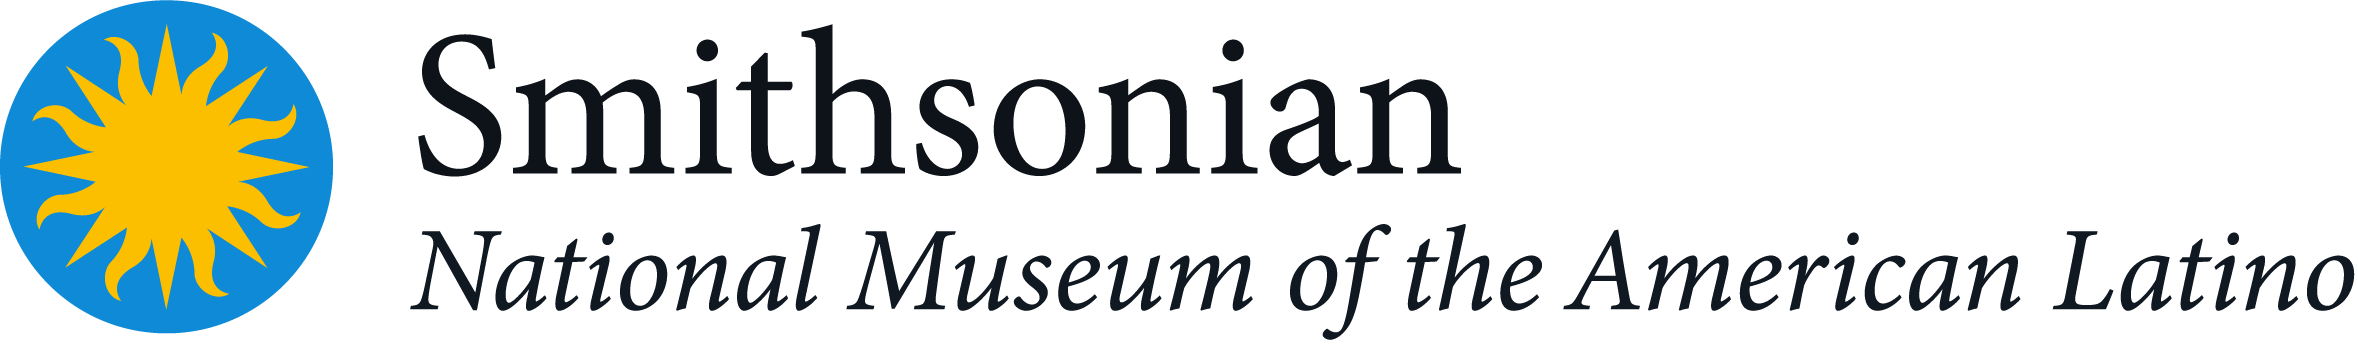 Smithsonian museum logo with yellow sun and text